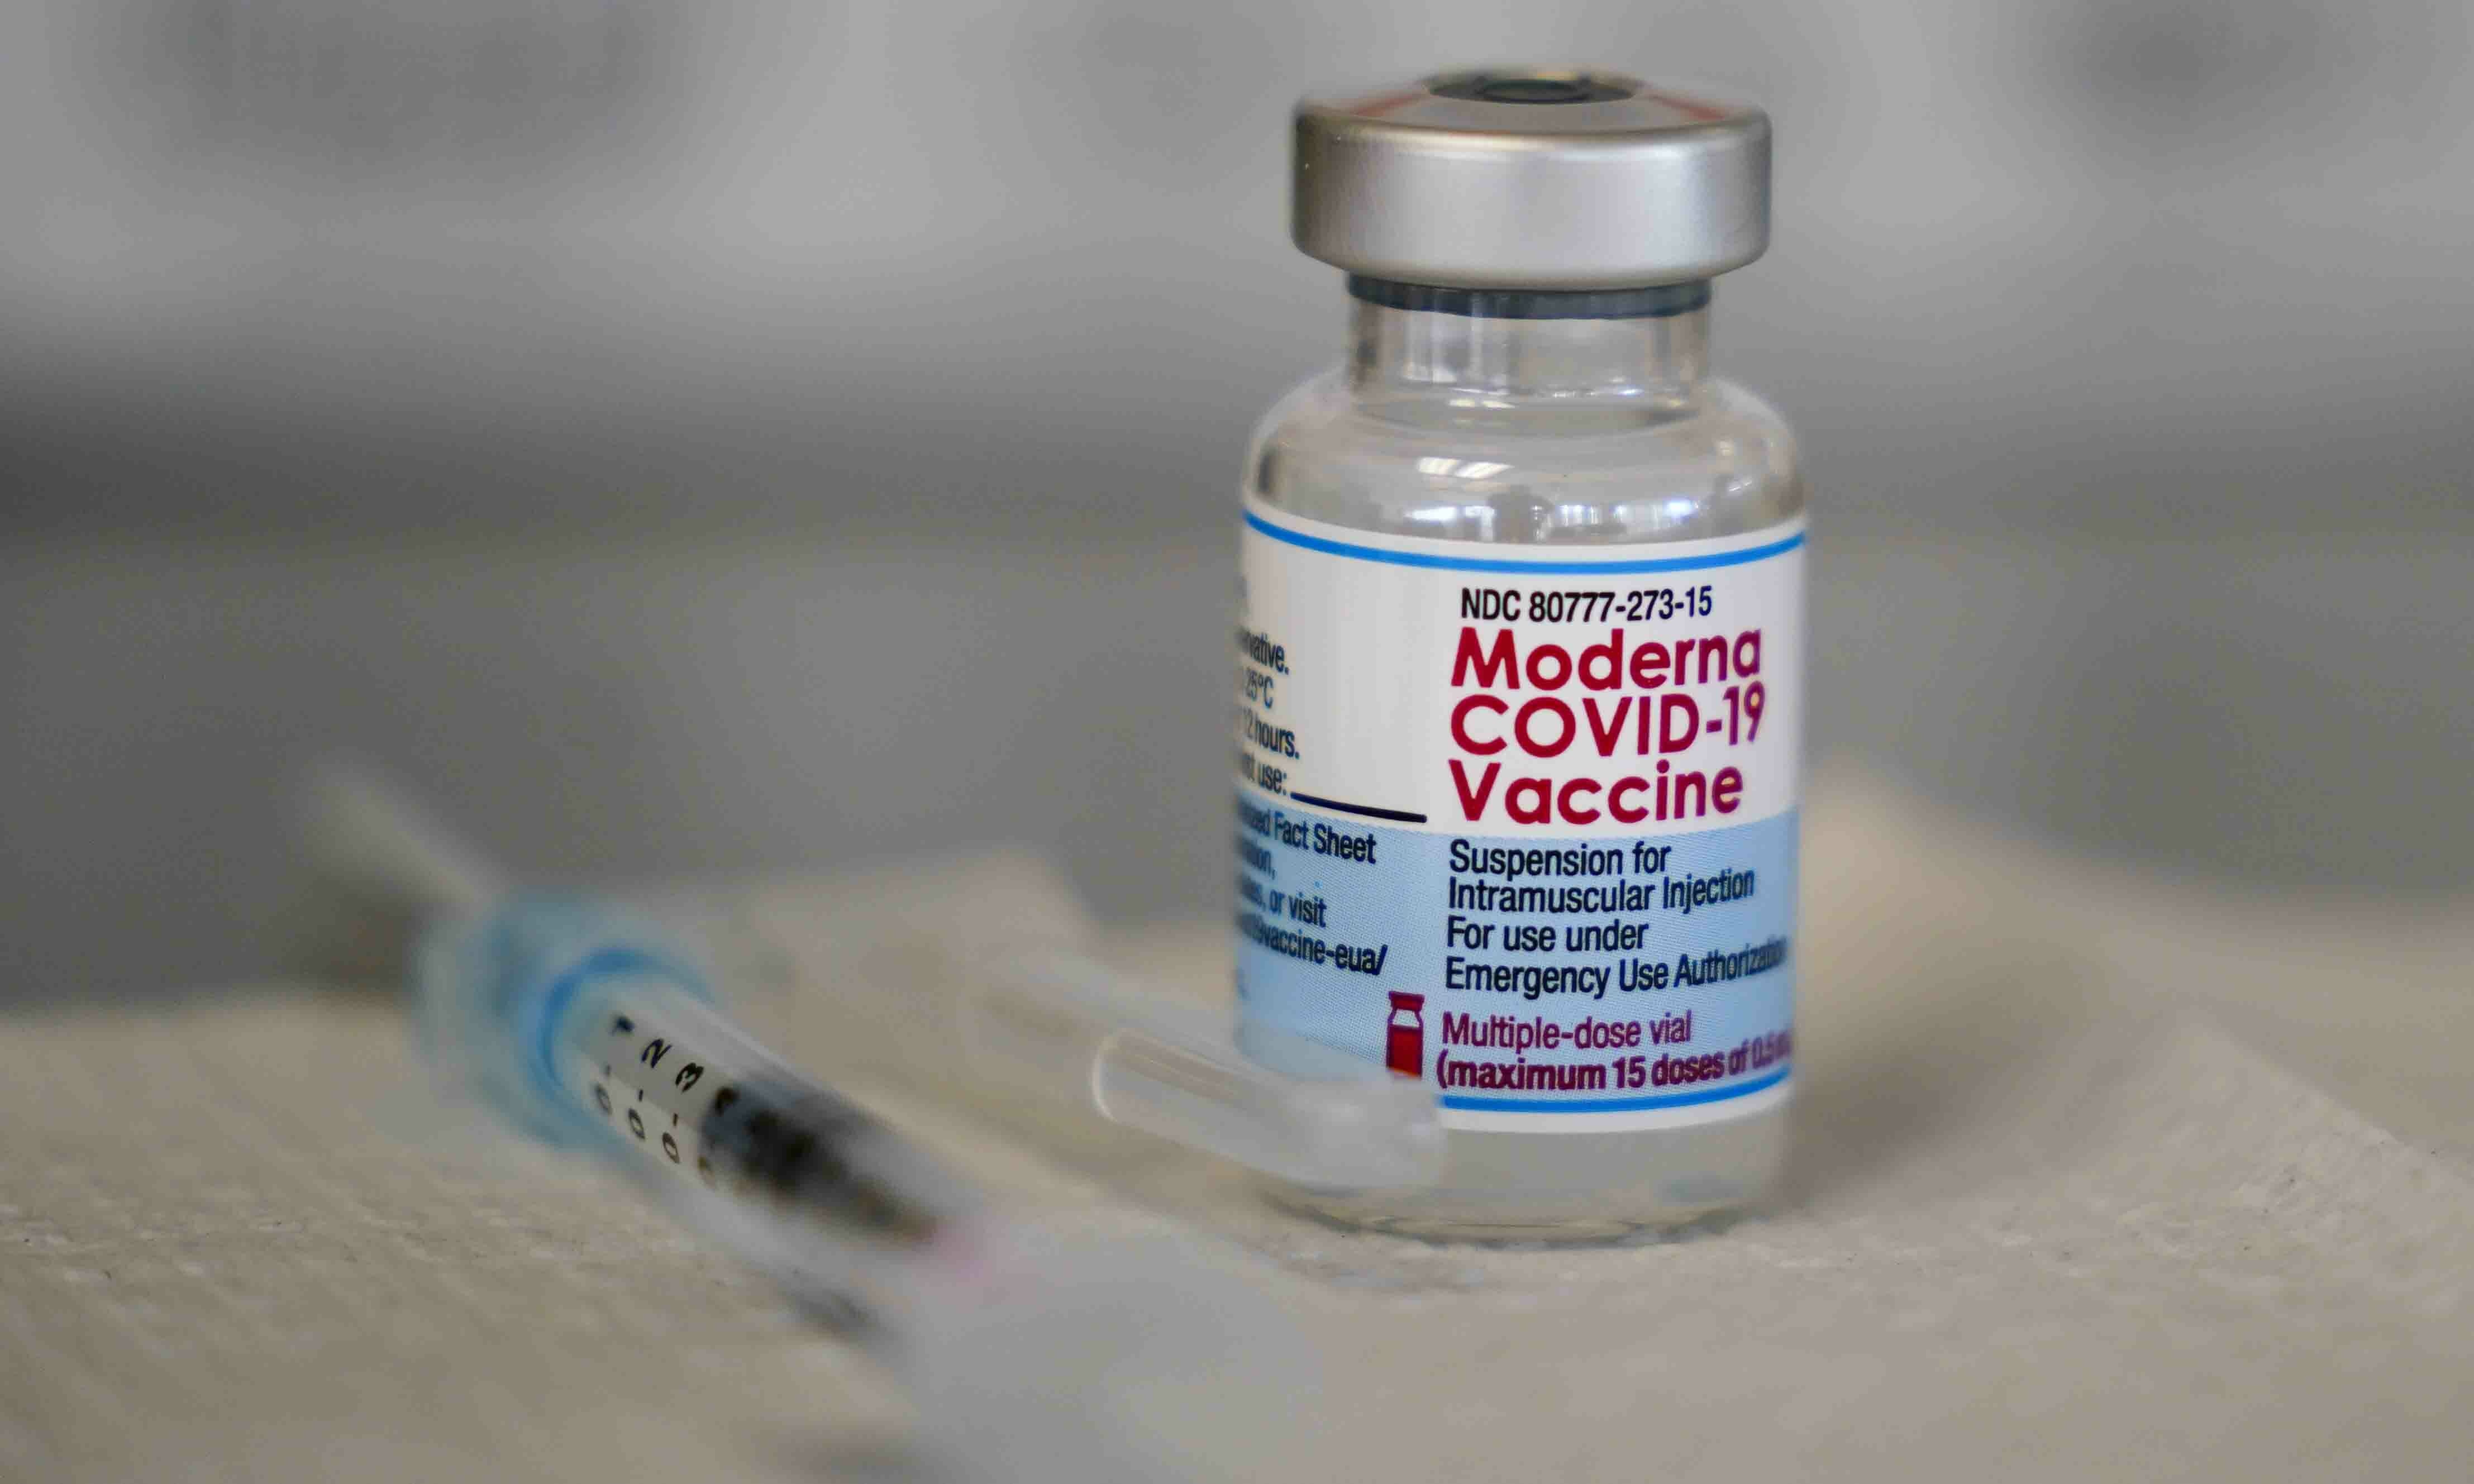 A vial of the Moderna Covid-19 vaccine is seen during a vaccination clinic at the Norristown Public Health Centre in Norristown, Pennsylvania on Dec 7. —AP